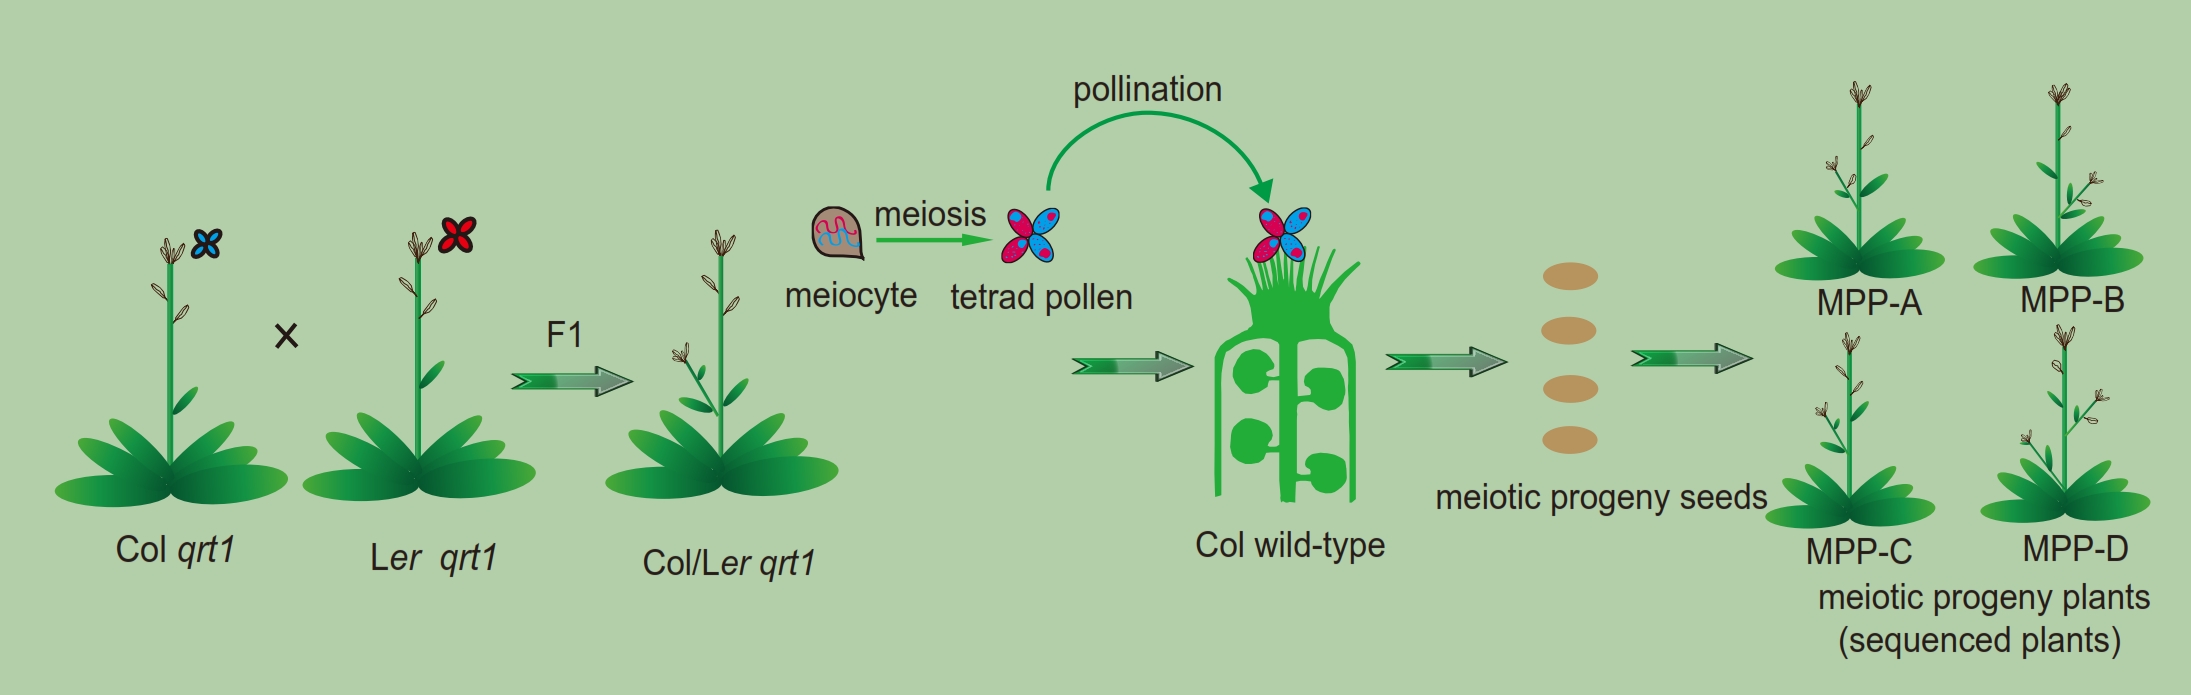 A schematic illustration of using genetic crosses to generate meiotic progeny plants for comprehensively investigating meiotic recombination events at a whole genome level at a single DNA base resolution. Notice: Only one pollen tetrad (four pollen grains) was picked for pollination.